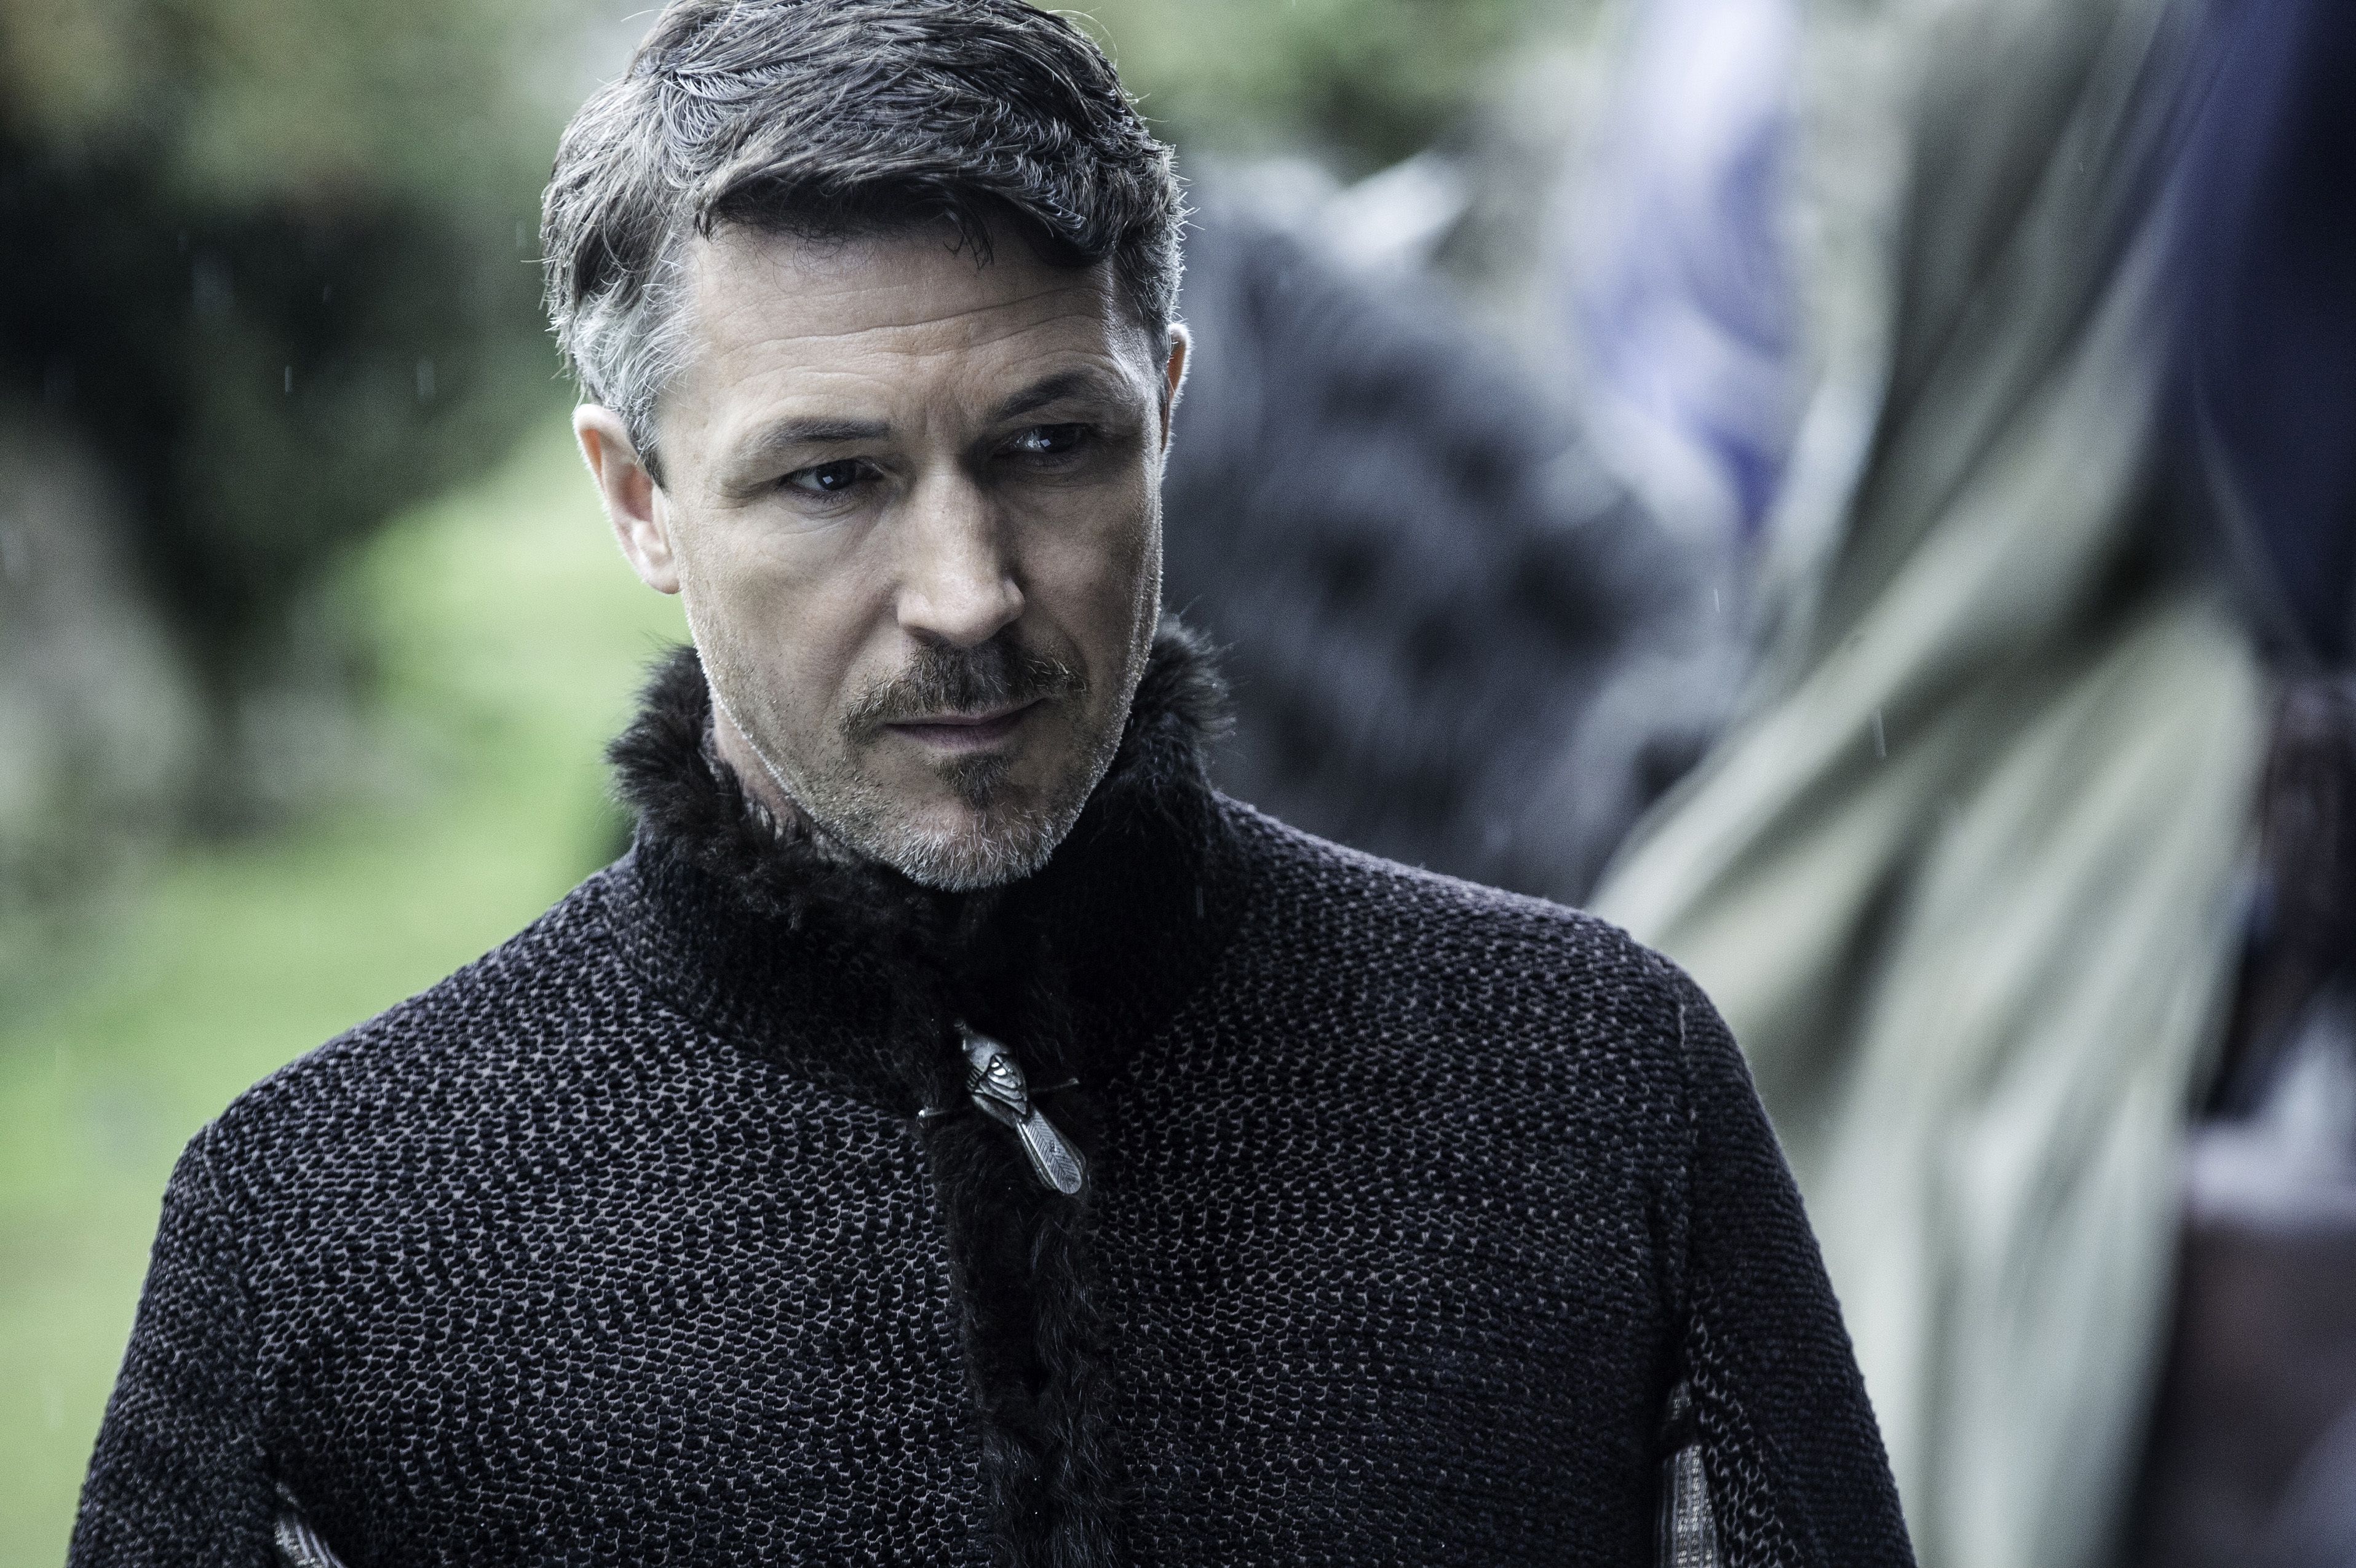 Game of Thrones' Theory Predicts Littlefinger as the Next King